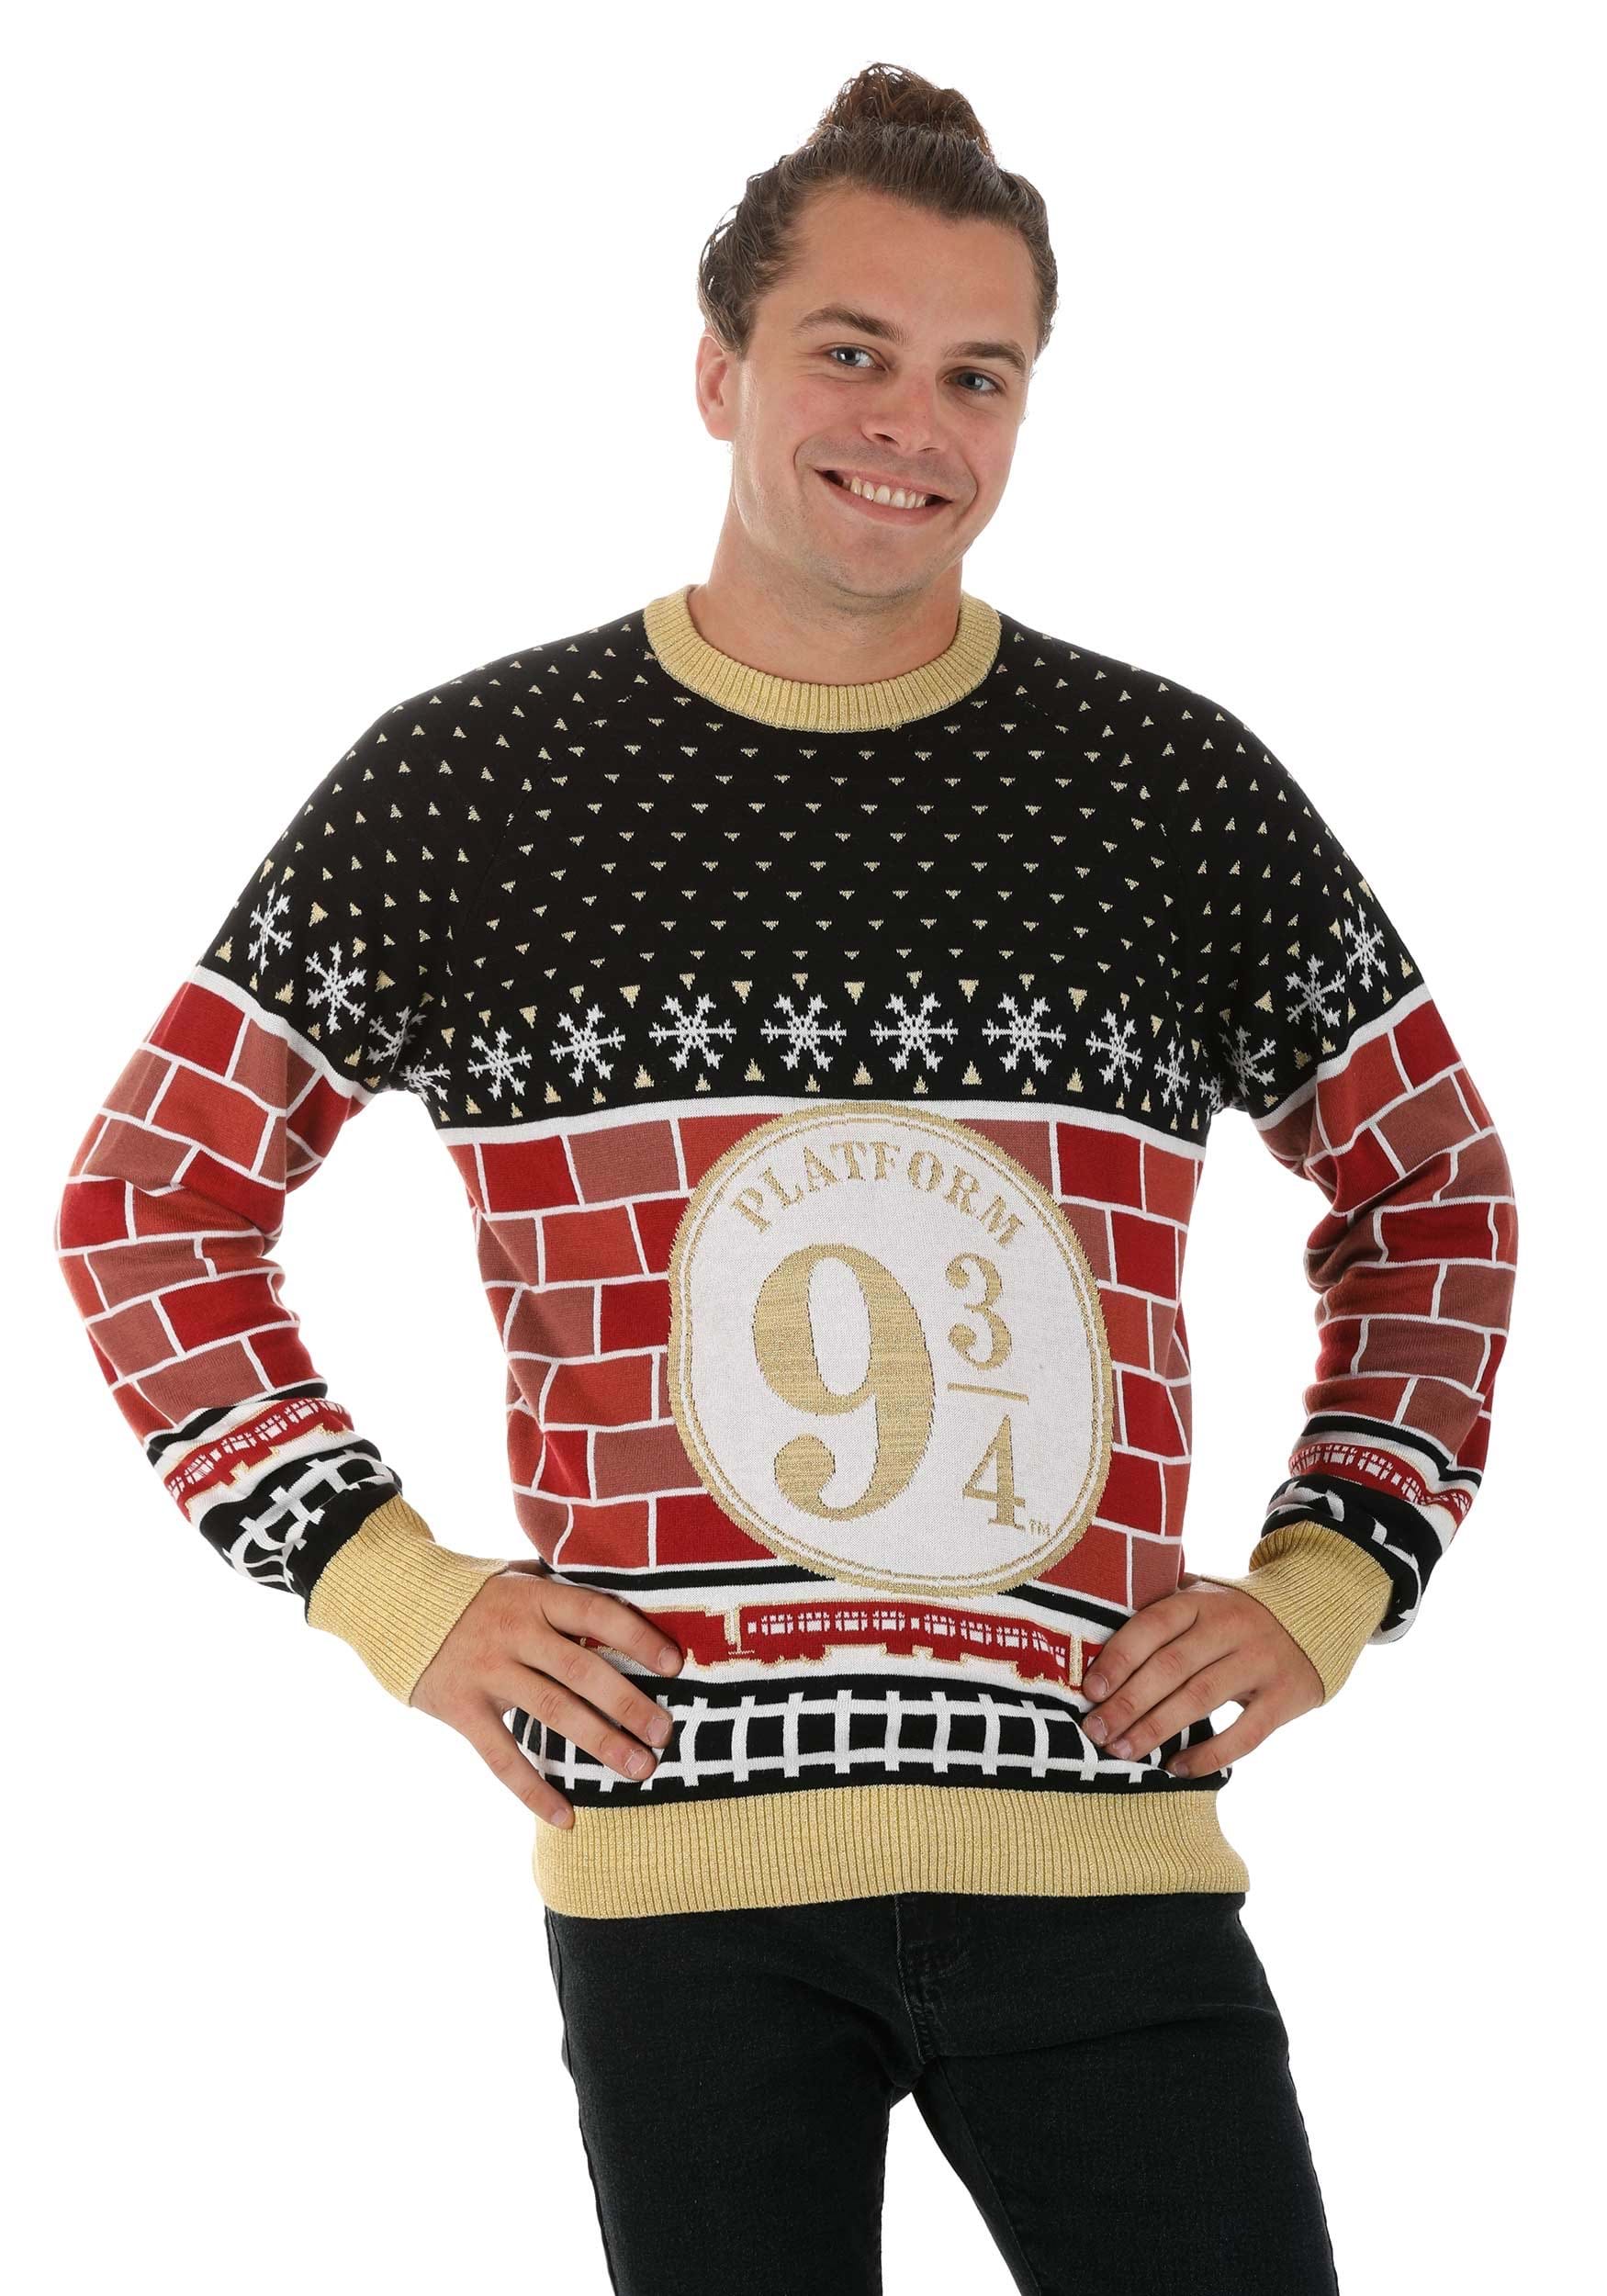 Platform 9 3/4 Harry Potter Christmas Sweater for Adults